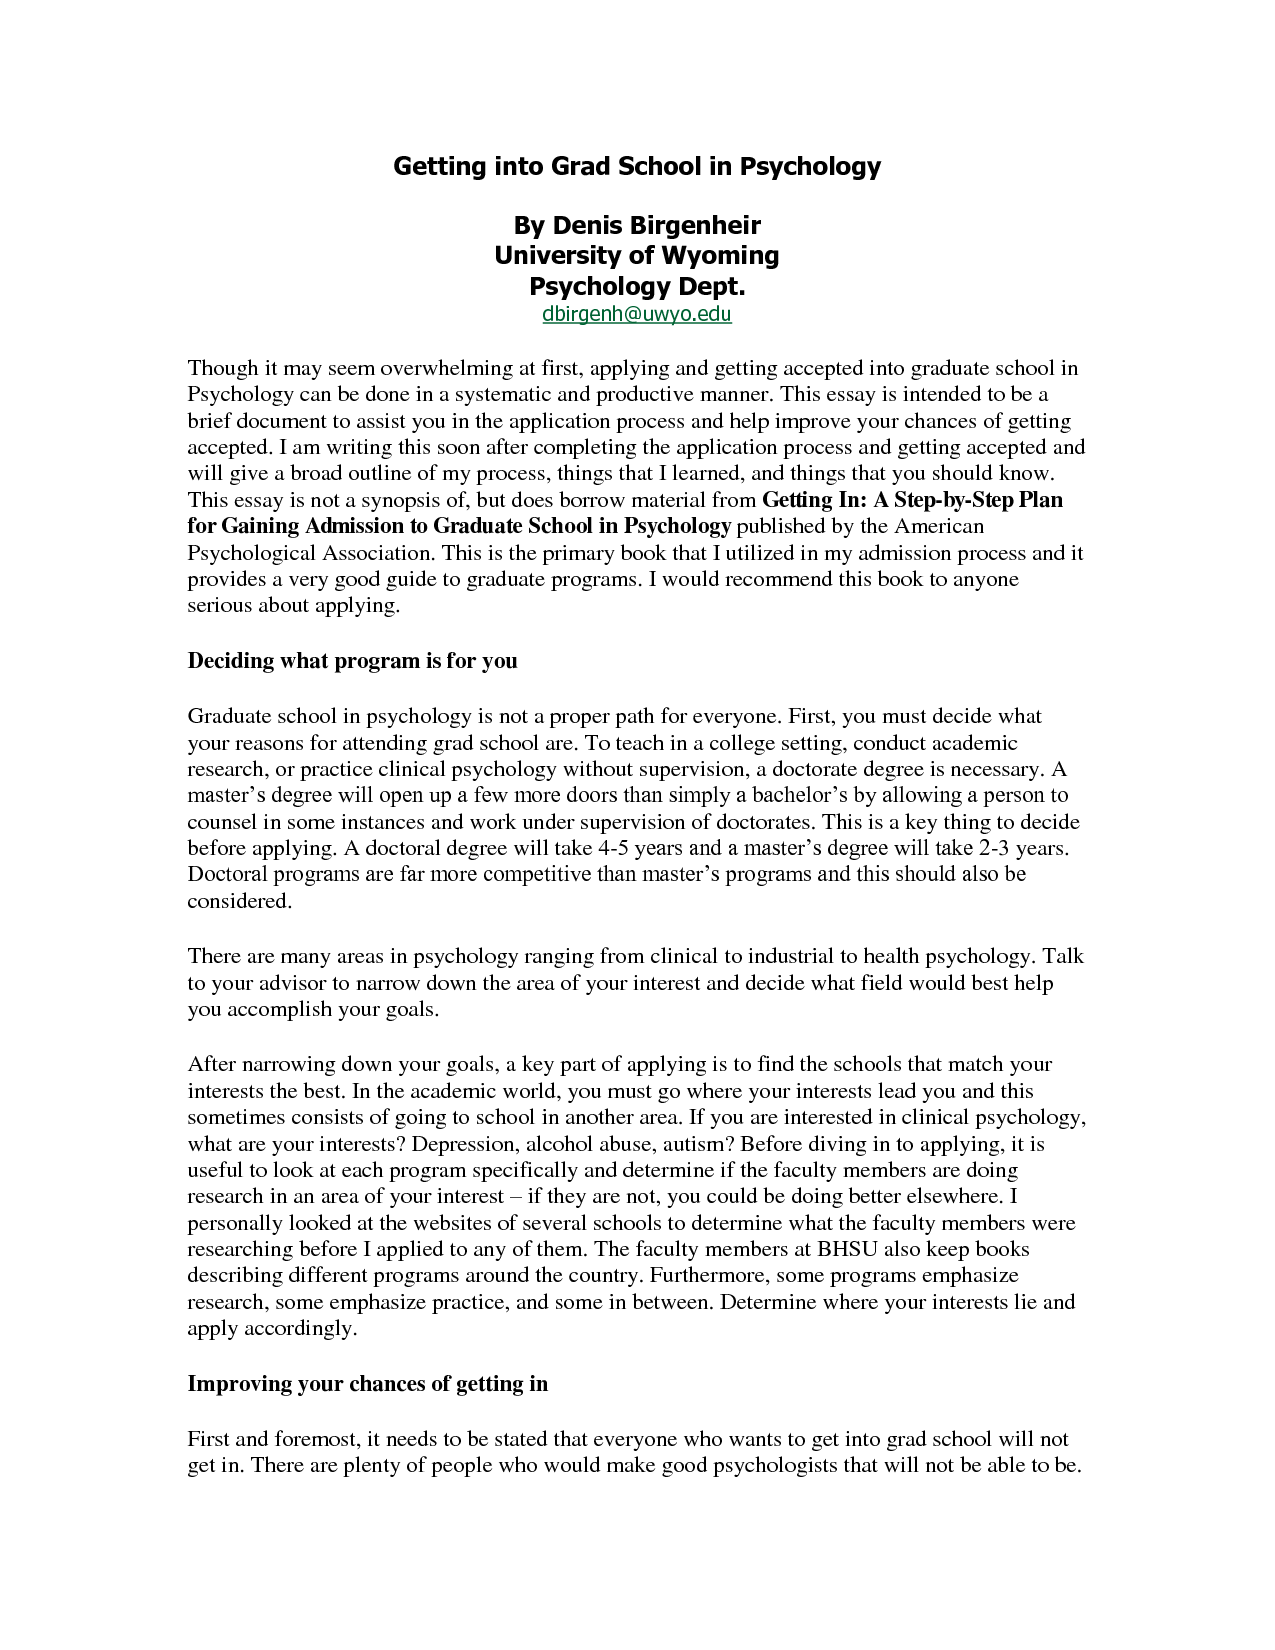 Personal essay for graduate school application how to write